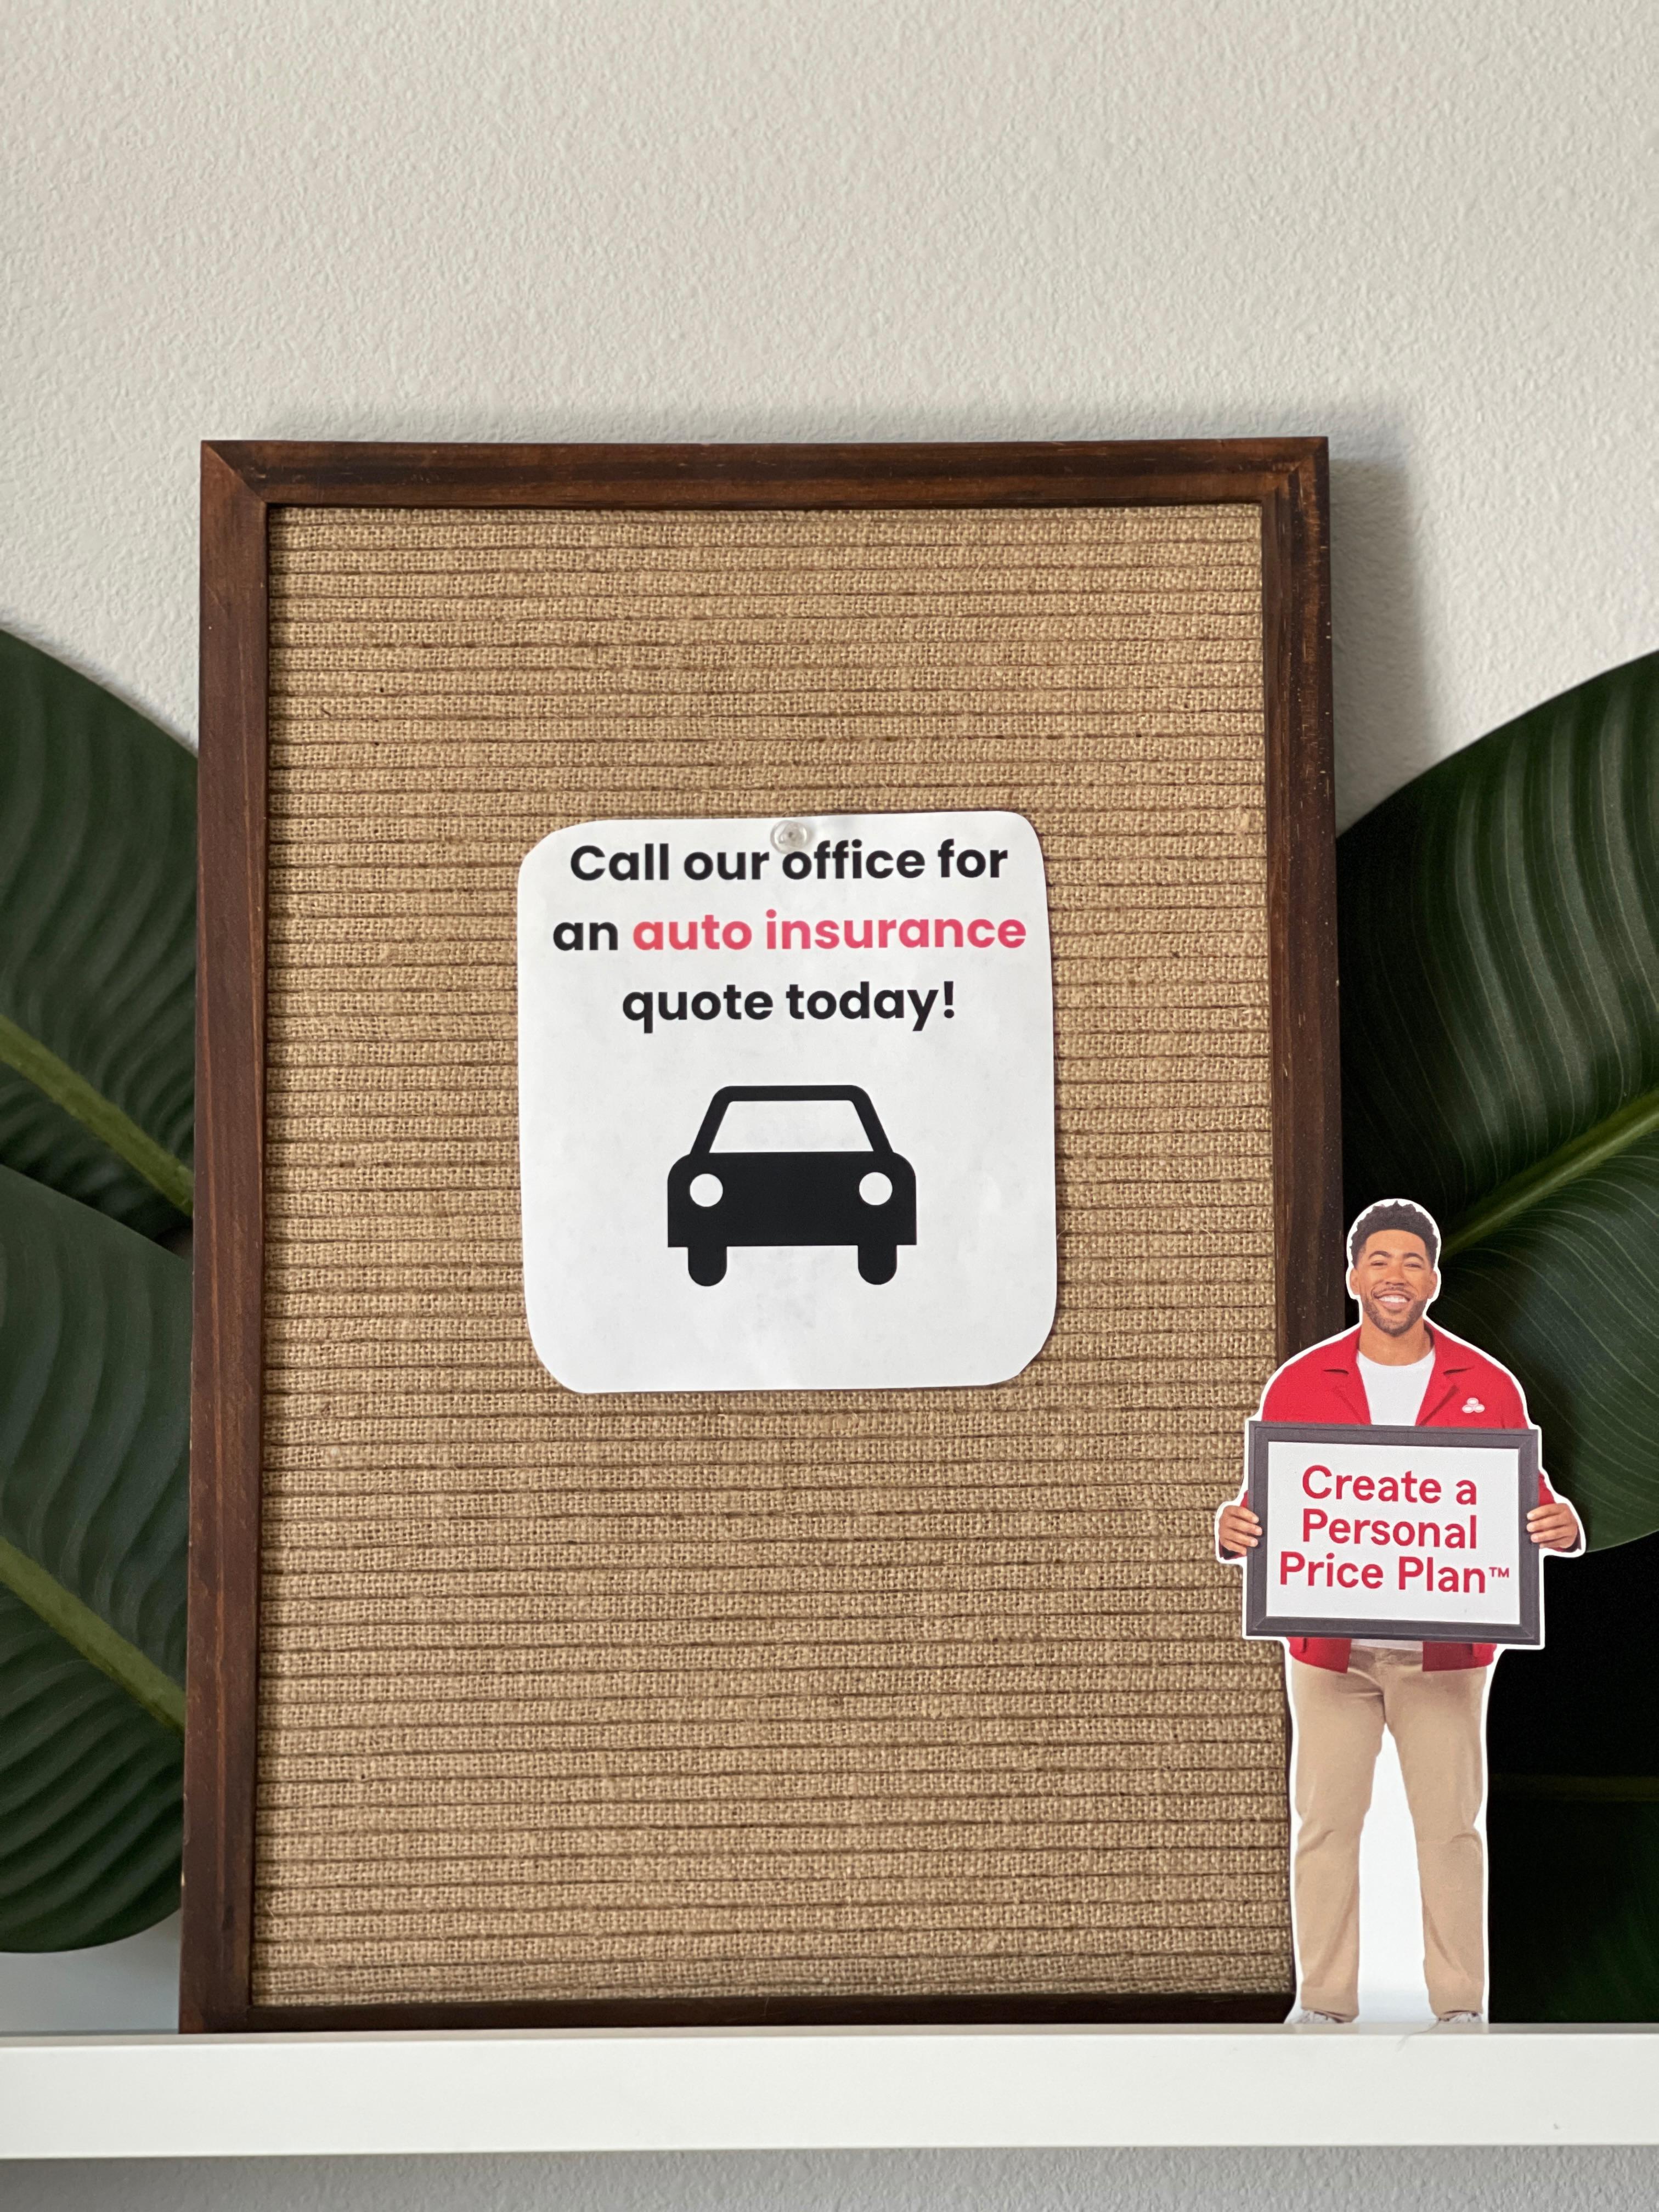 Call or stop by our office for a free car insurance quote today!